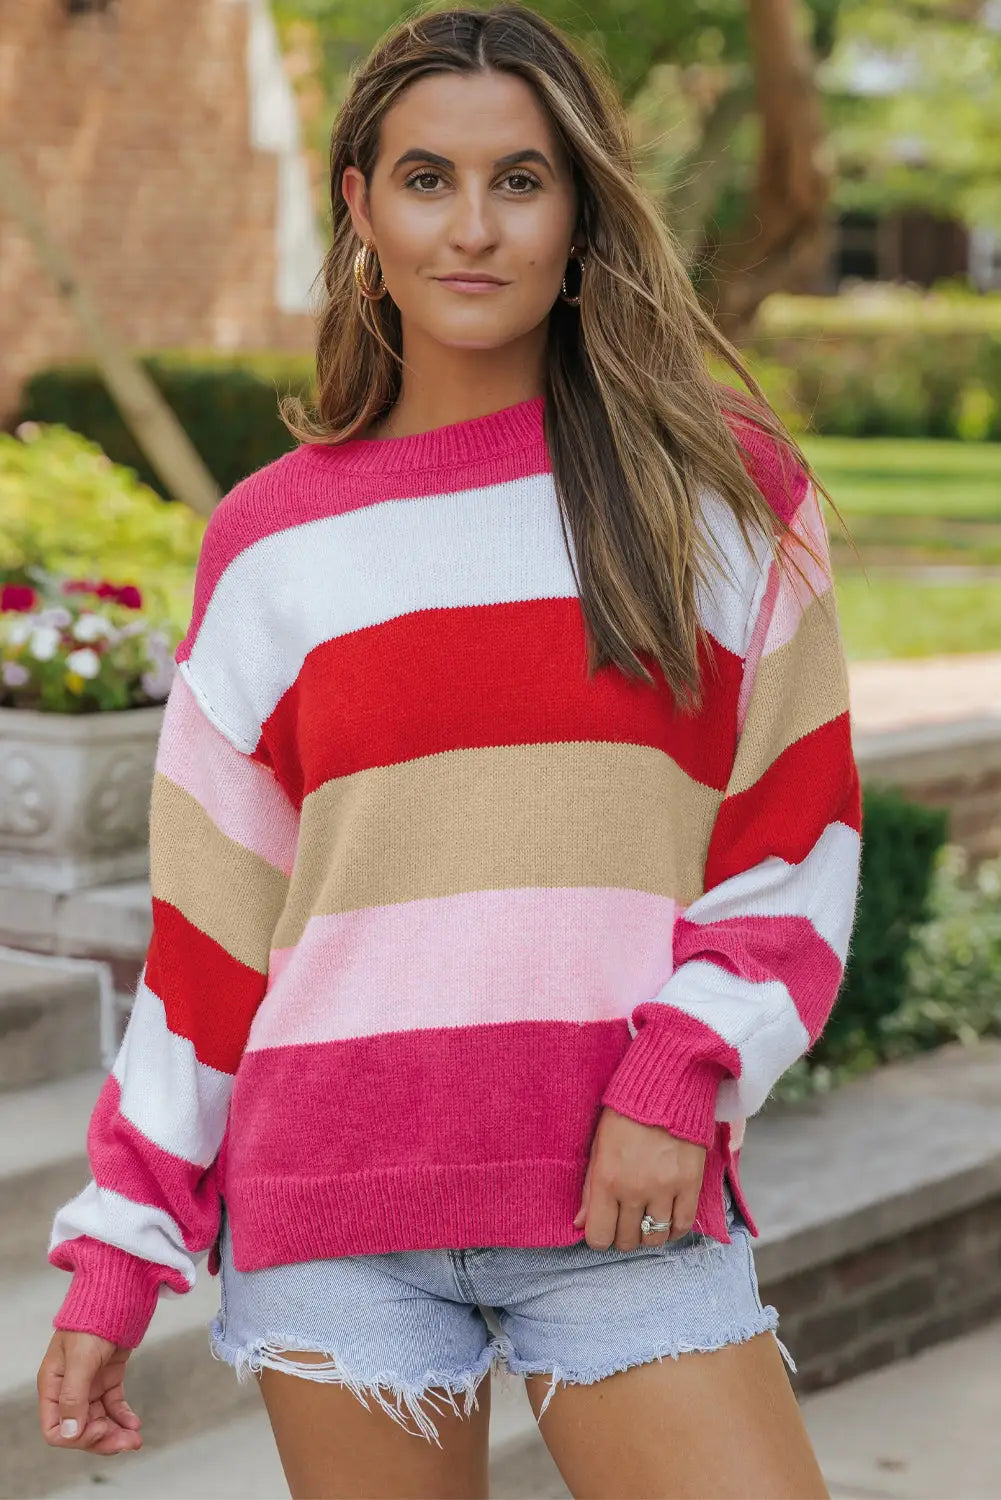 Red mix horizon stripes dolman sleeve sweater - s / 65% acrylic + 35% polyester - sweaters & cardigans